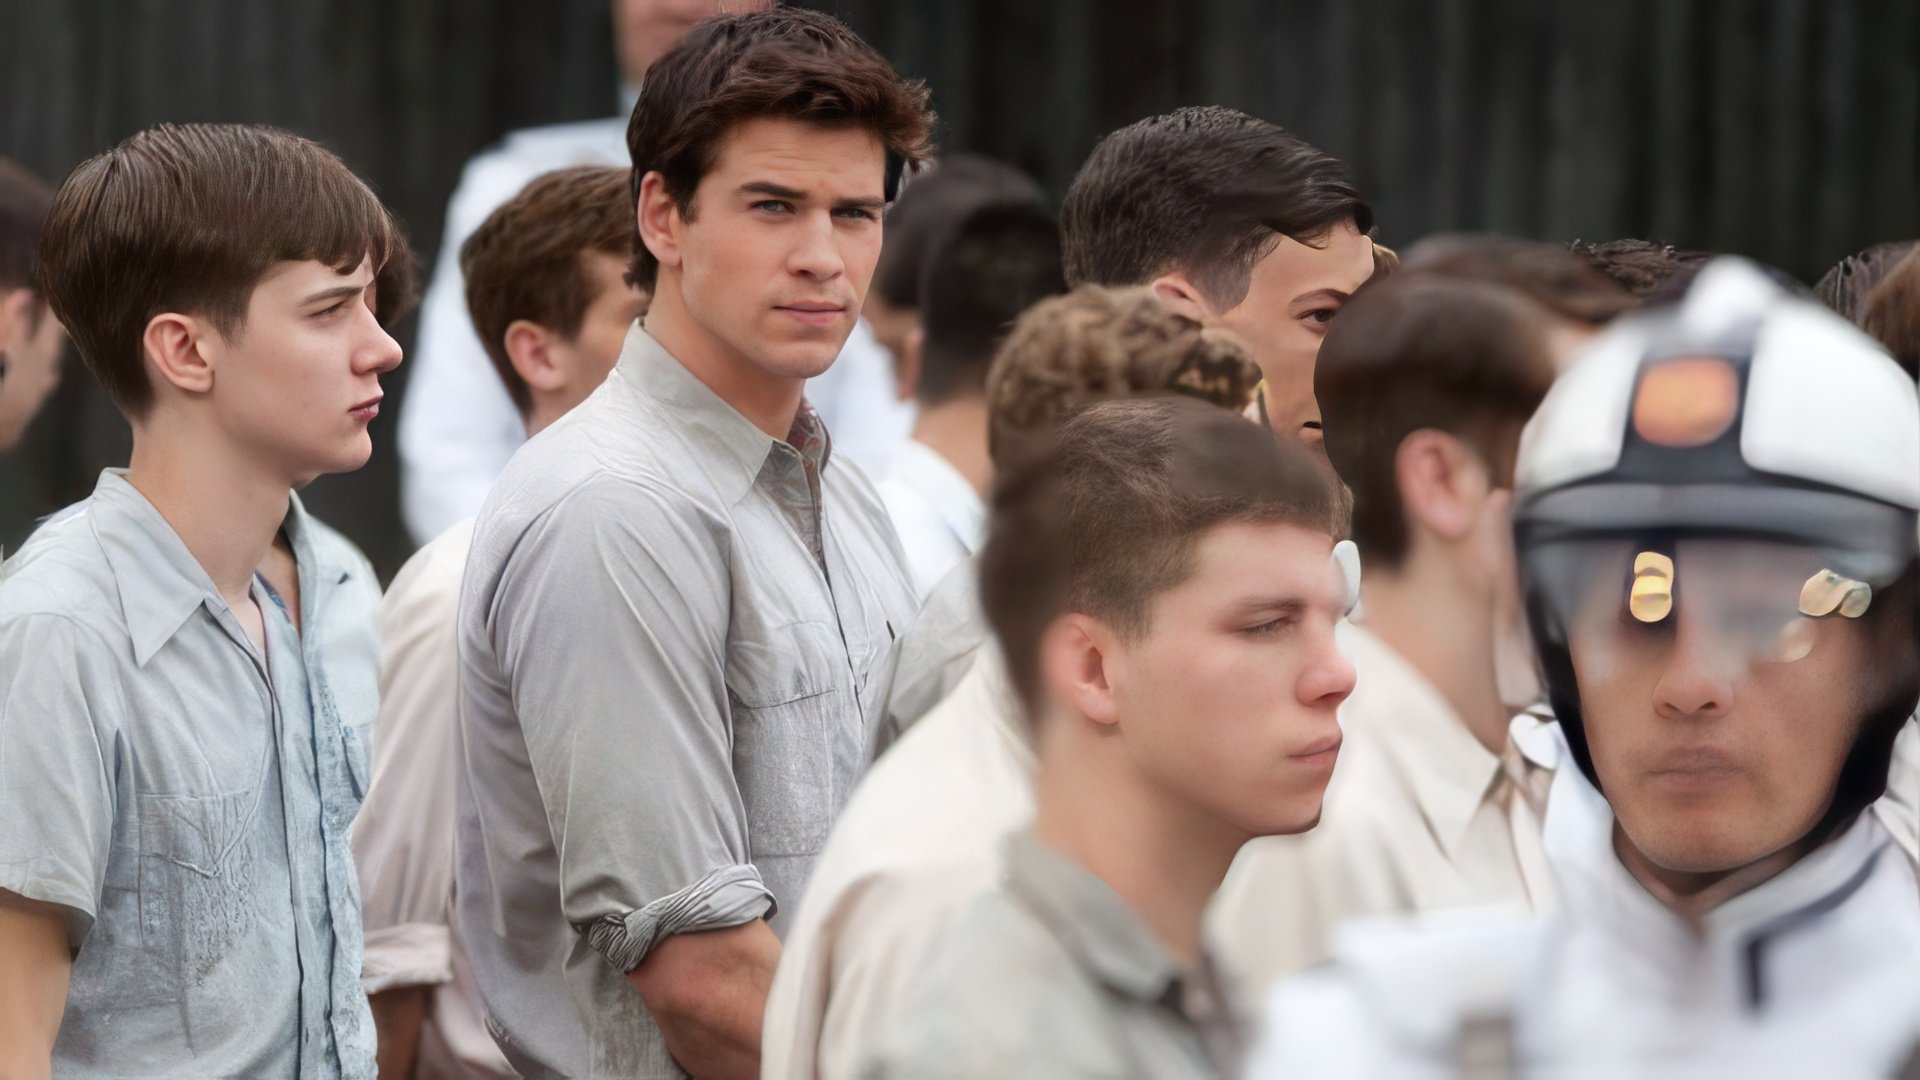 Gale Hawthorne from The Hunger Games - Liam Hemsworth